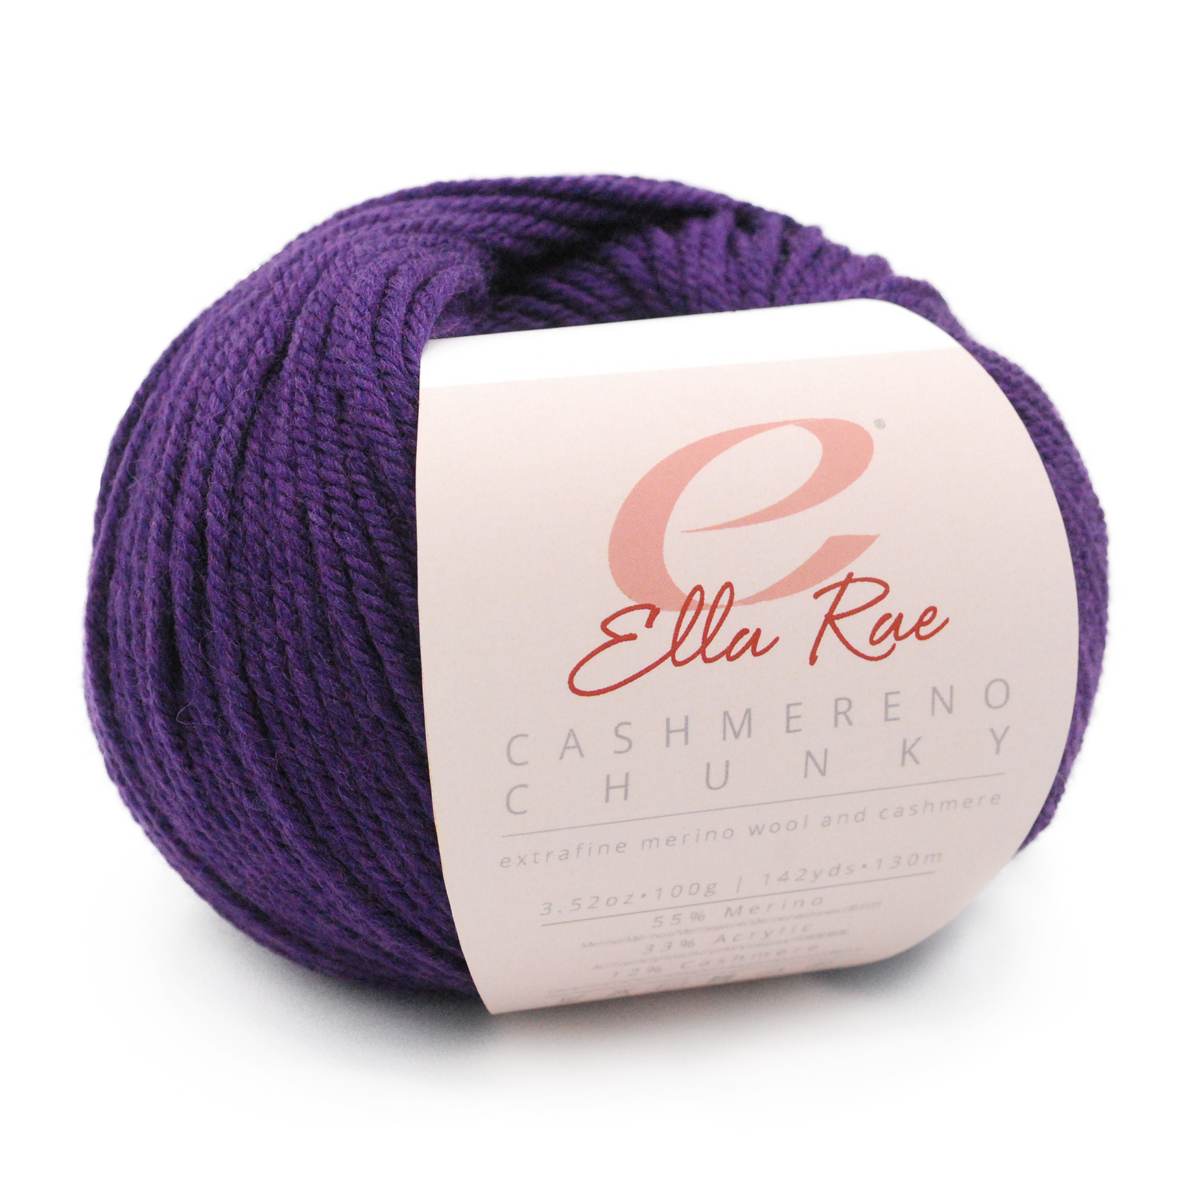 a skein of Cashmereno Chunky